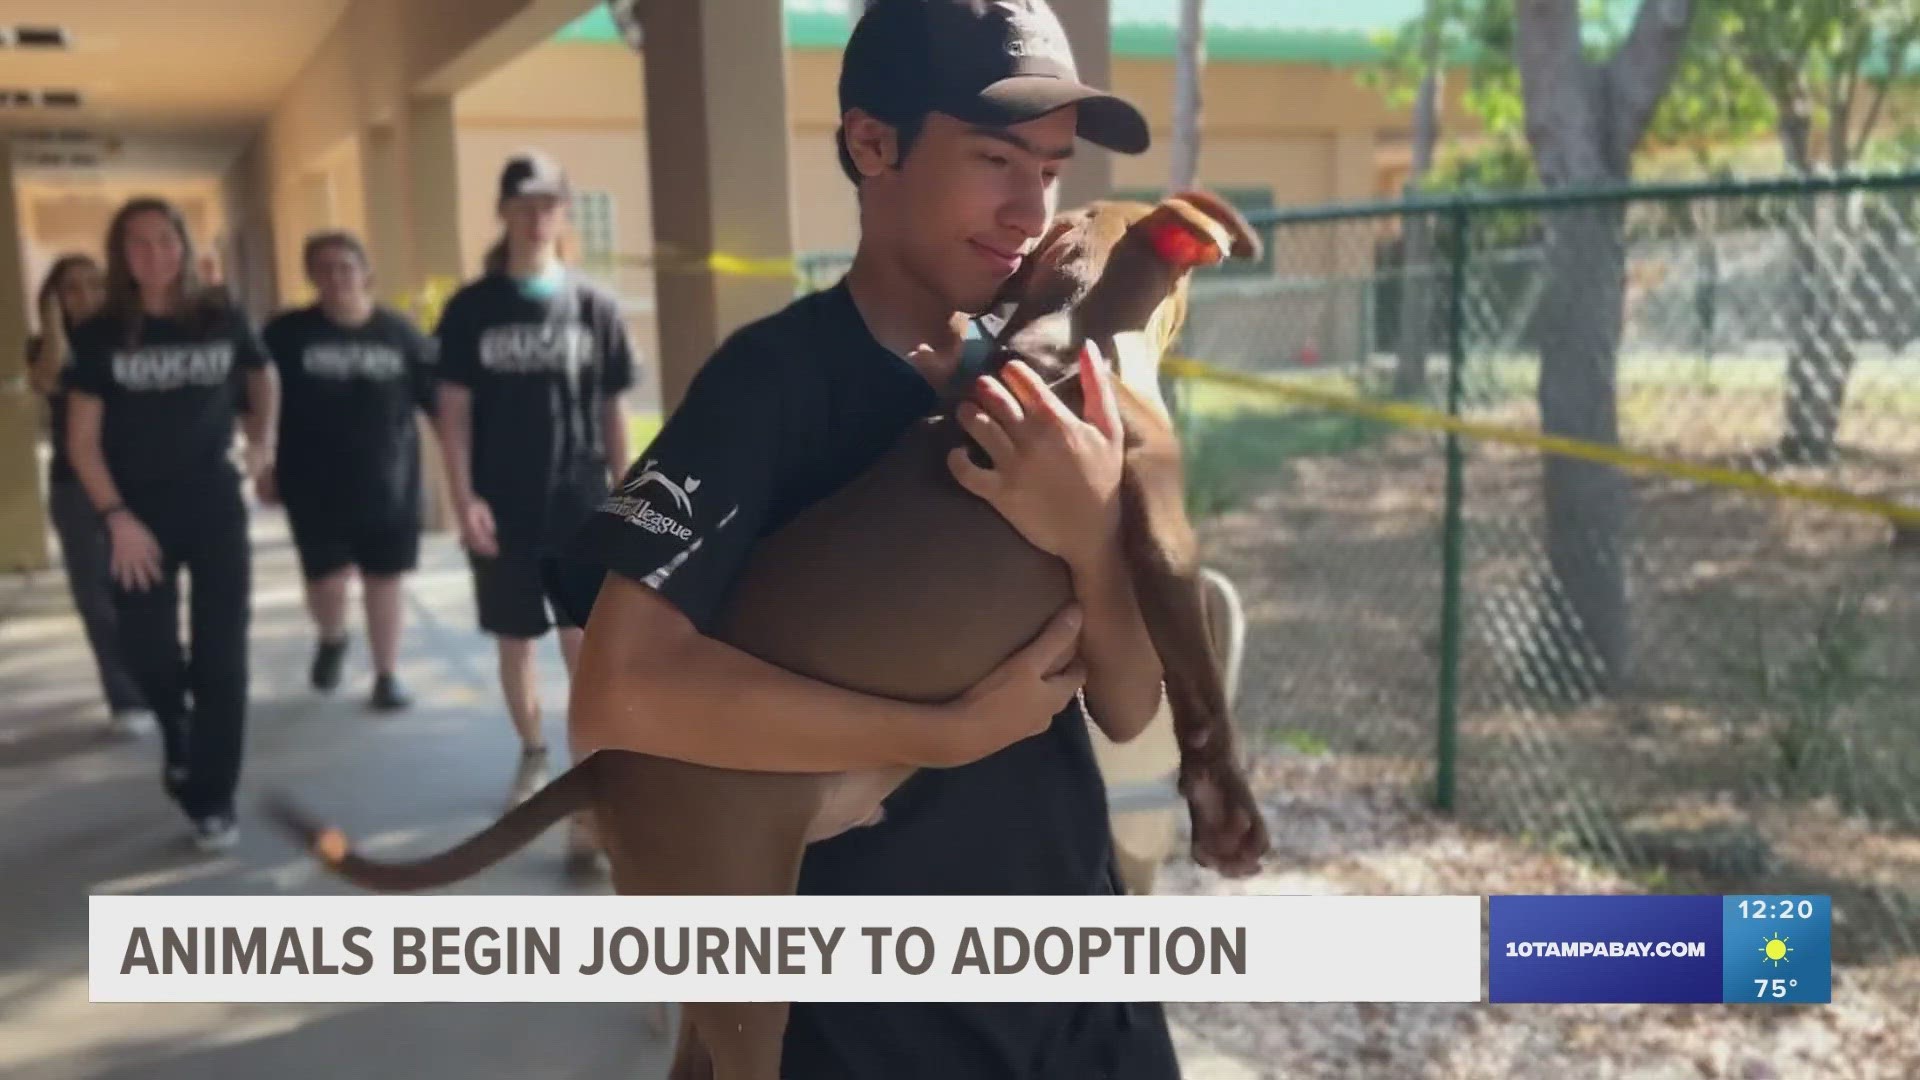 North Shore Animal League America will drive several animals without homes from the Tampa Bay area to North Shore Animal League America's campus in New York.